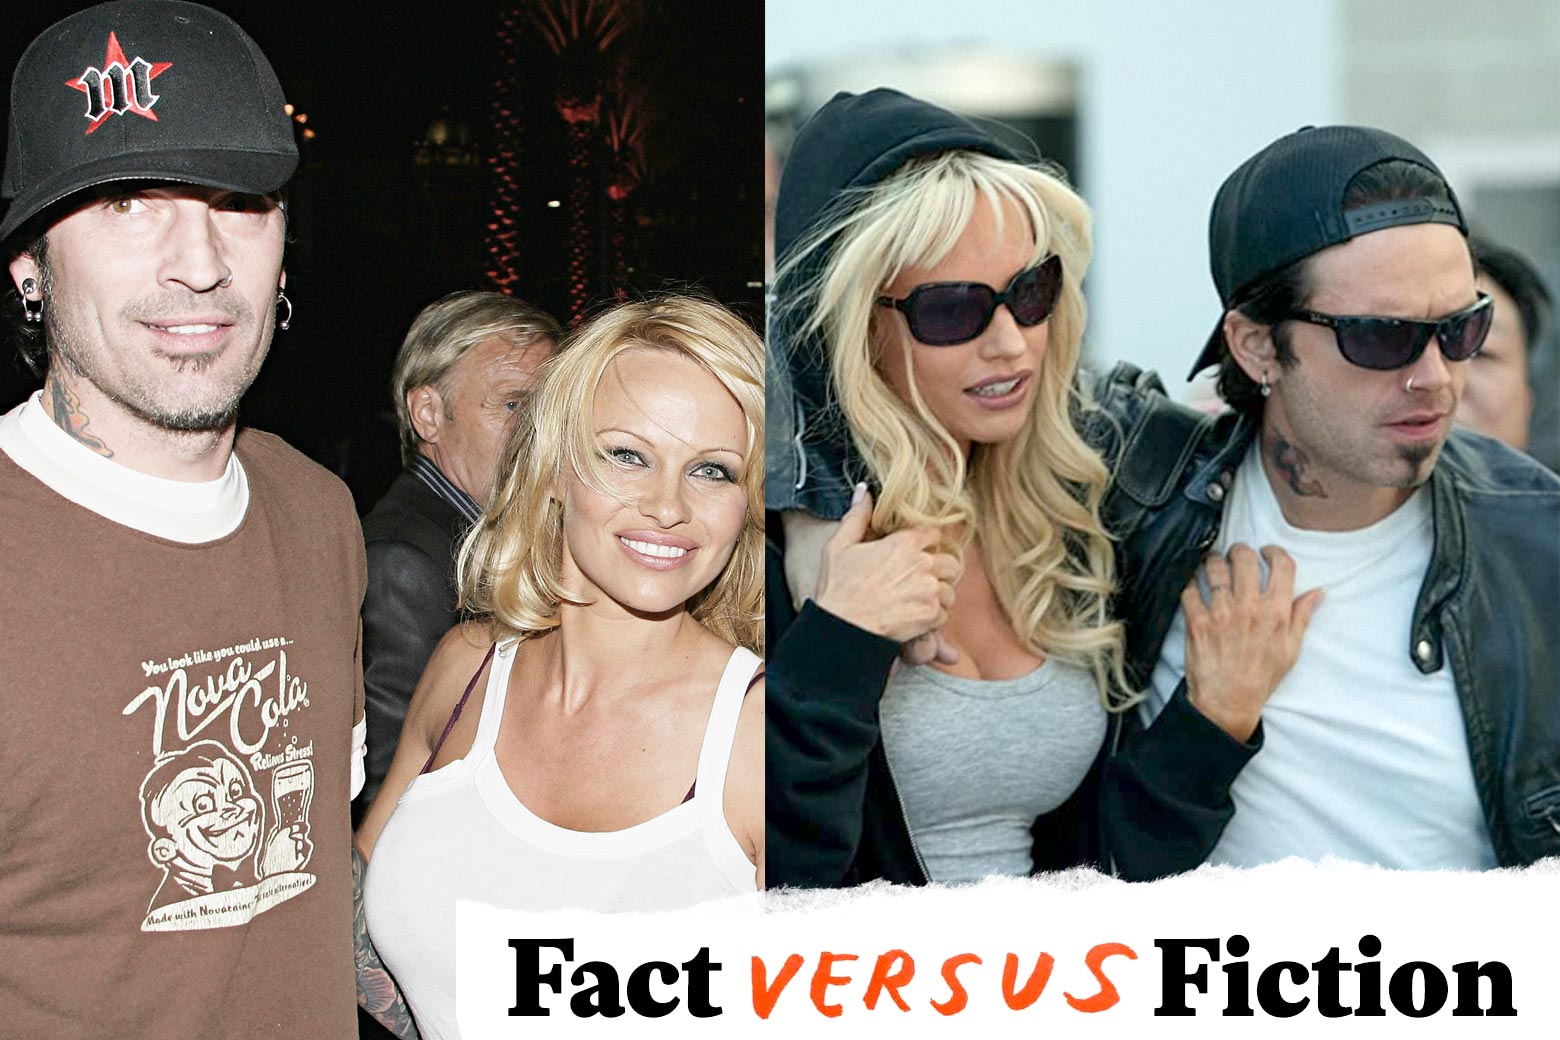 Pam and Tommy accuracy whats fact and whats fiction in the Hulu miniseries about Pamela Anderson and Tommy Lee. image